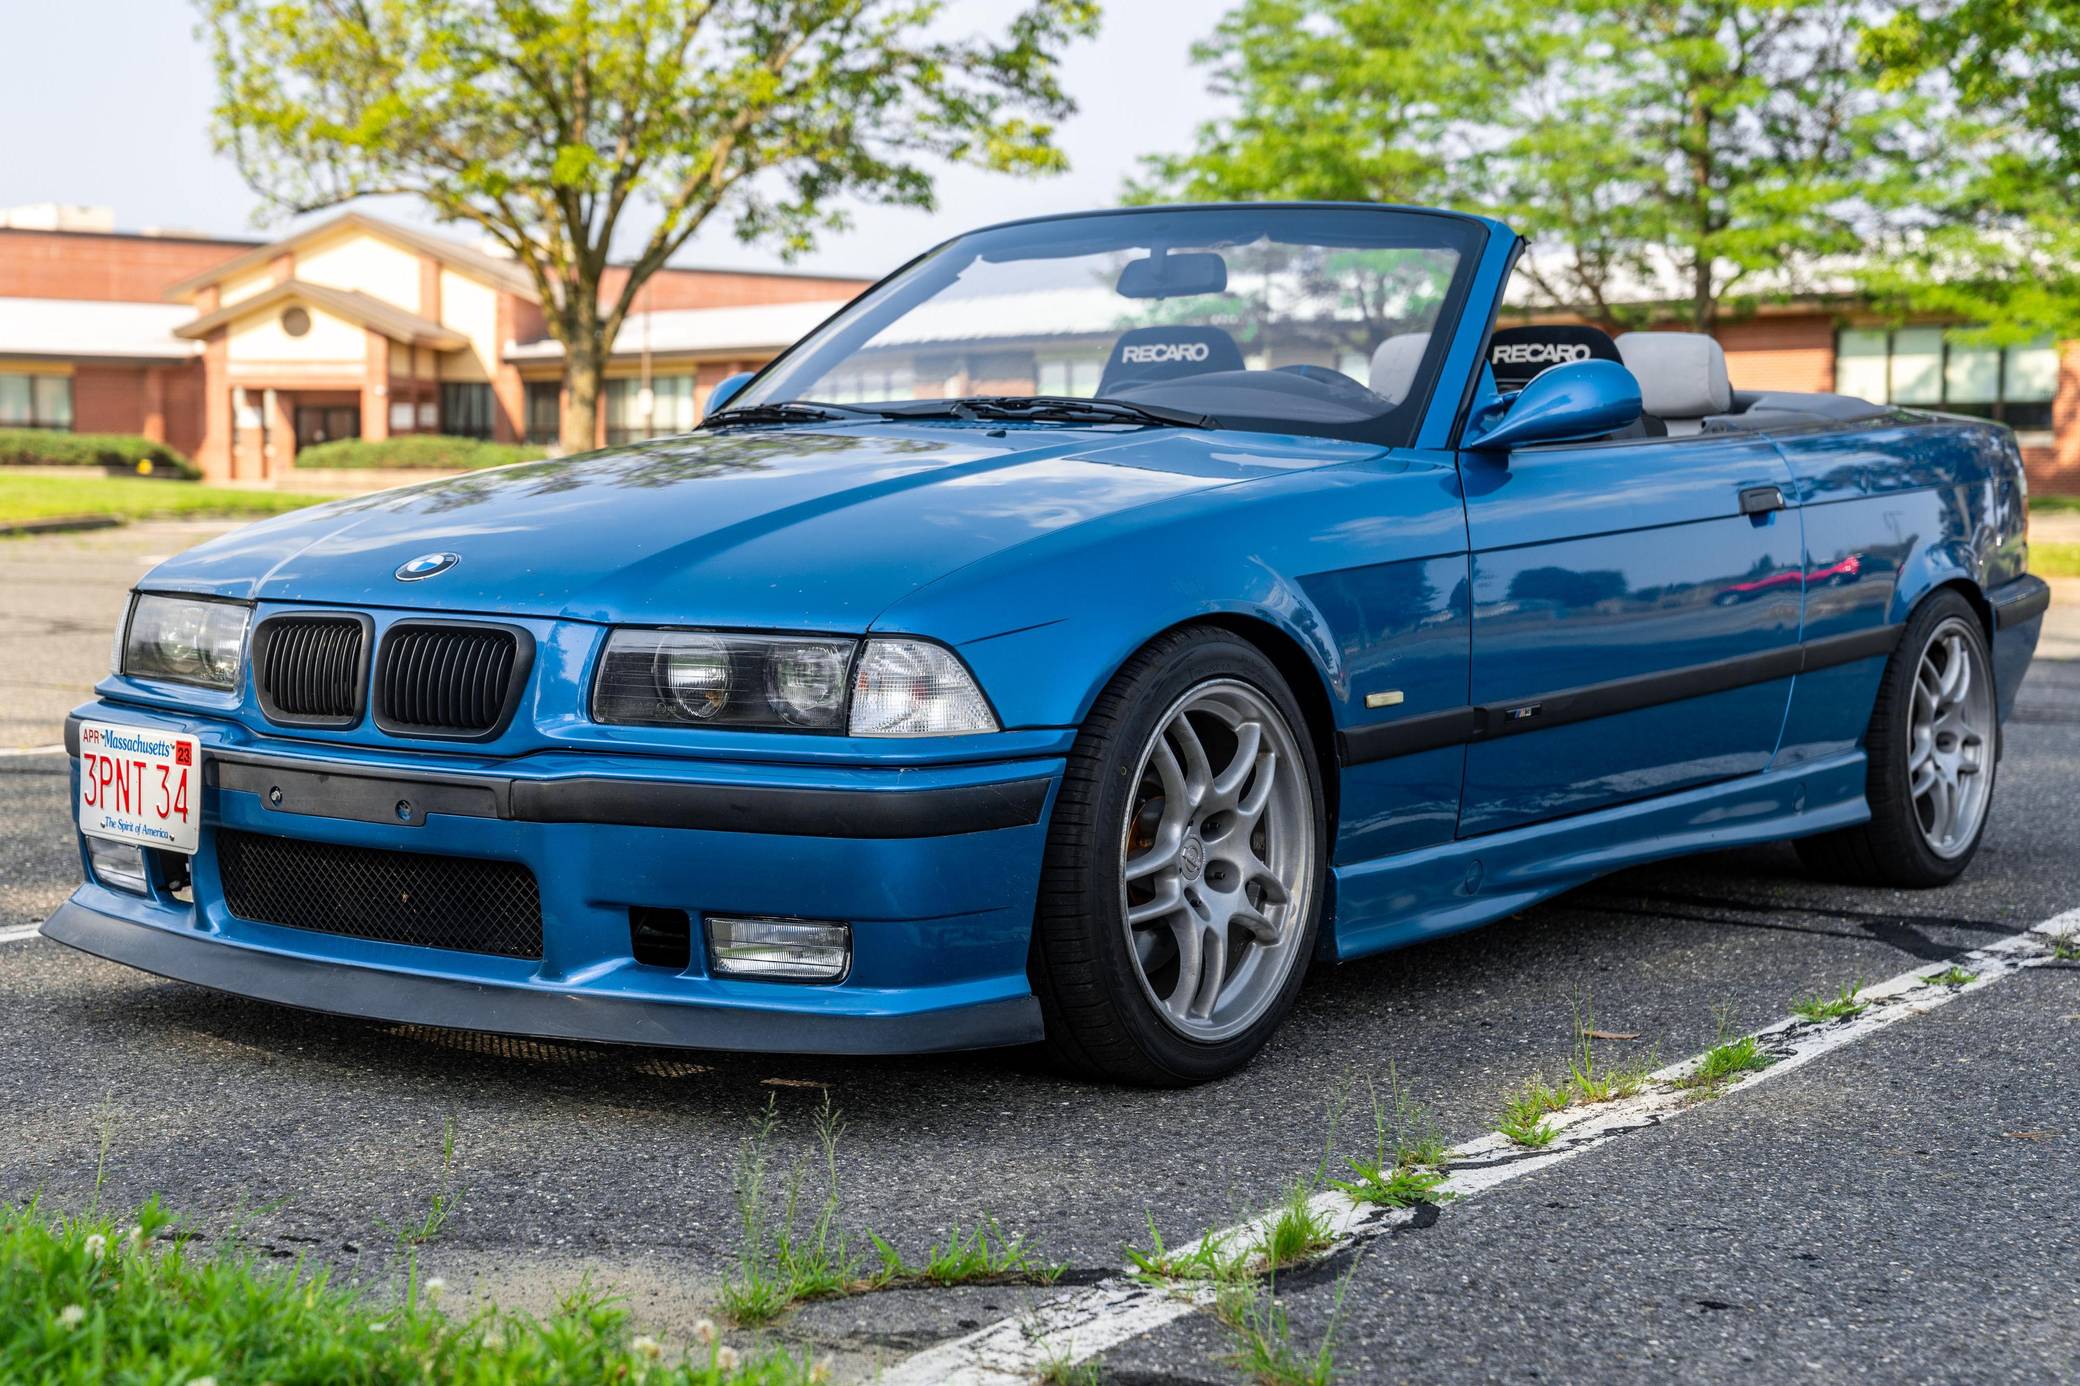 Everything You Need to Know About BMW E30 vs. E36 M3 — Condor